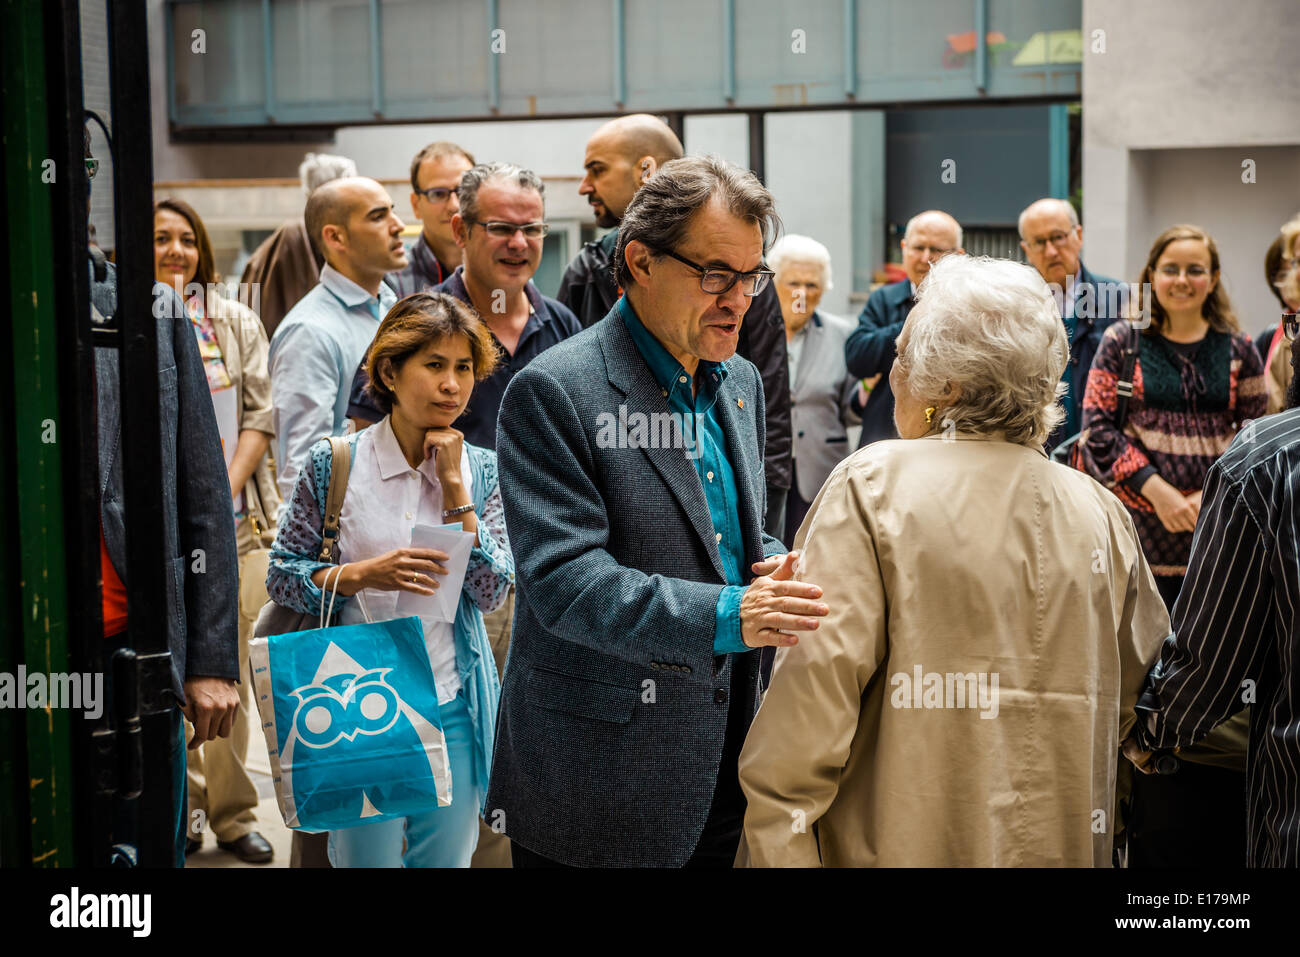 Barcelona, Spain. May 25th, 2014: Artur Mas i Gavarro, President of the Generalitat of Catalonia, greets citizens as he enters the polling location for the European Parliament election in Barcelona. Credit:  matthi/Alamy Live News Stock Photo